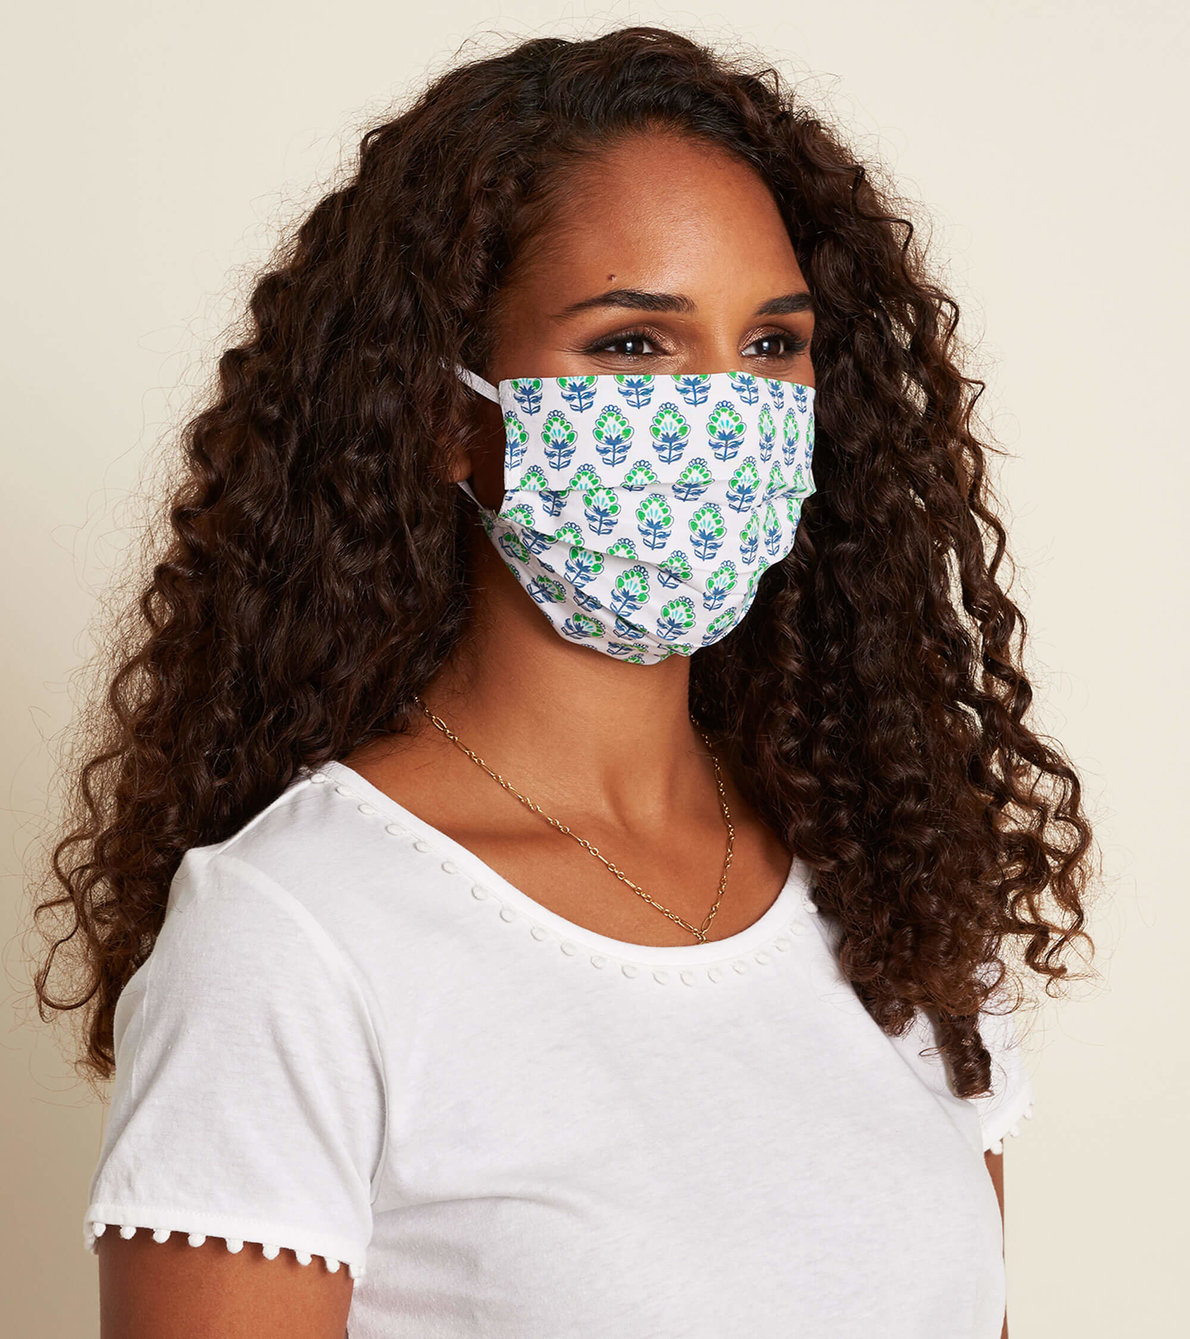 View larger image of Non-Medical Reusable Adult Face Mask - Sari Flowers